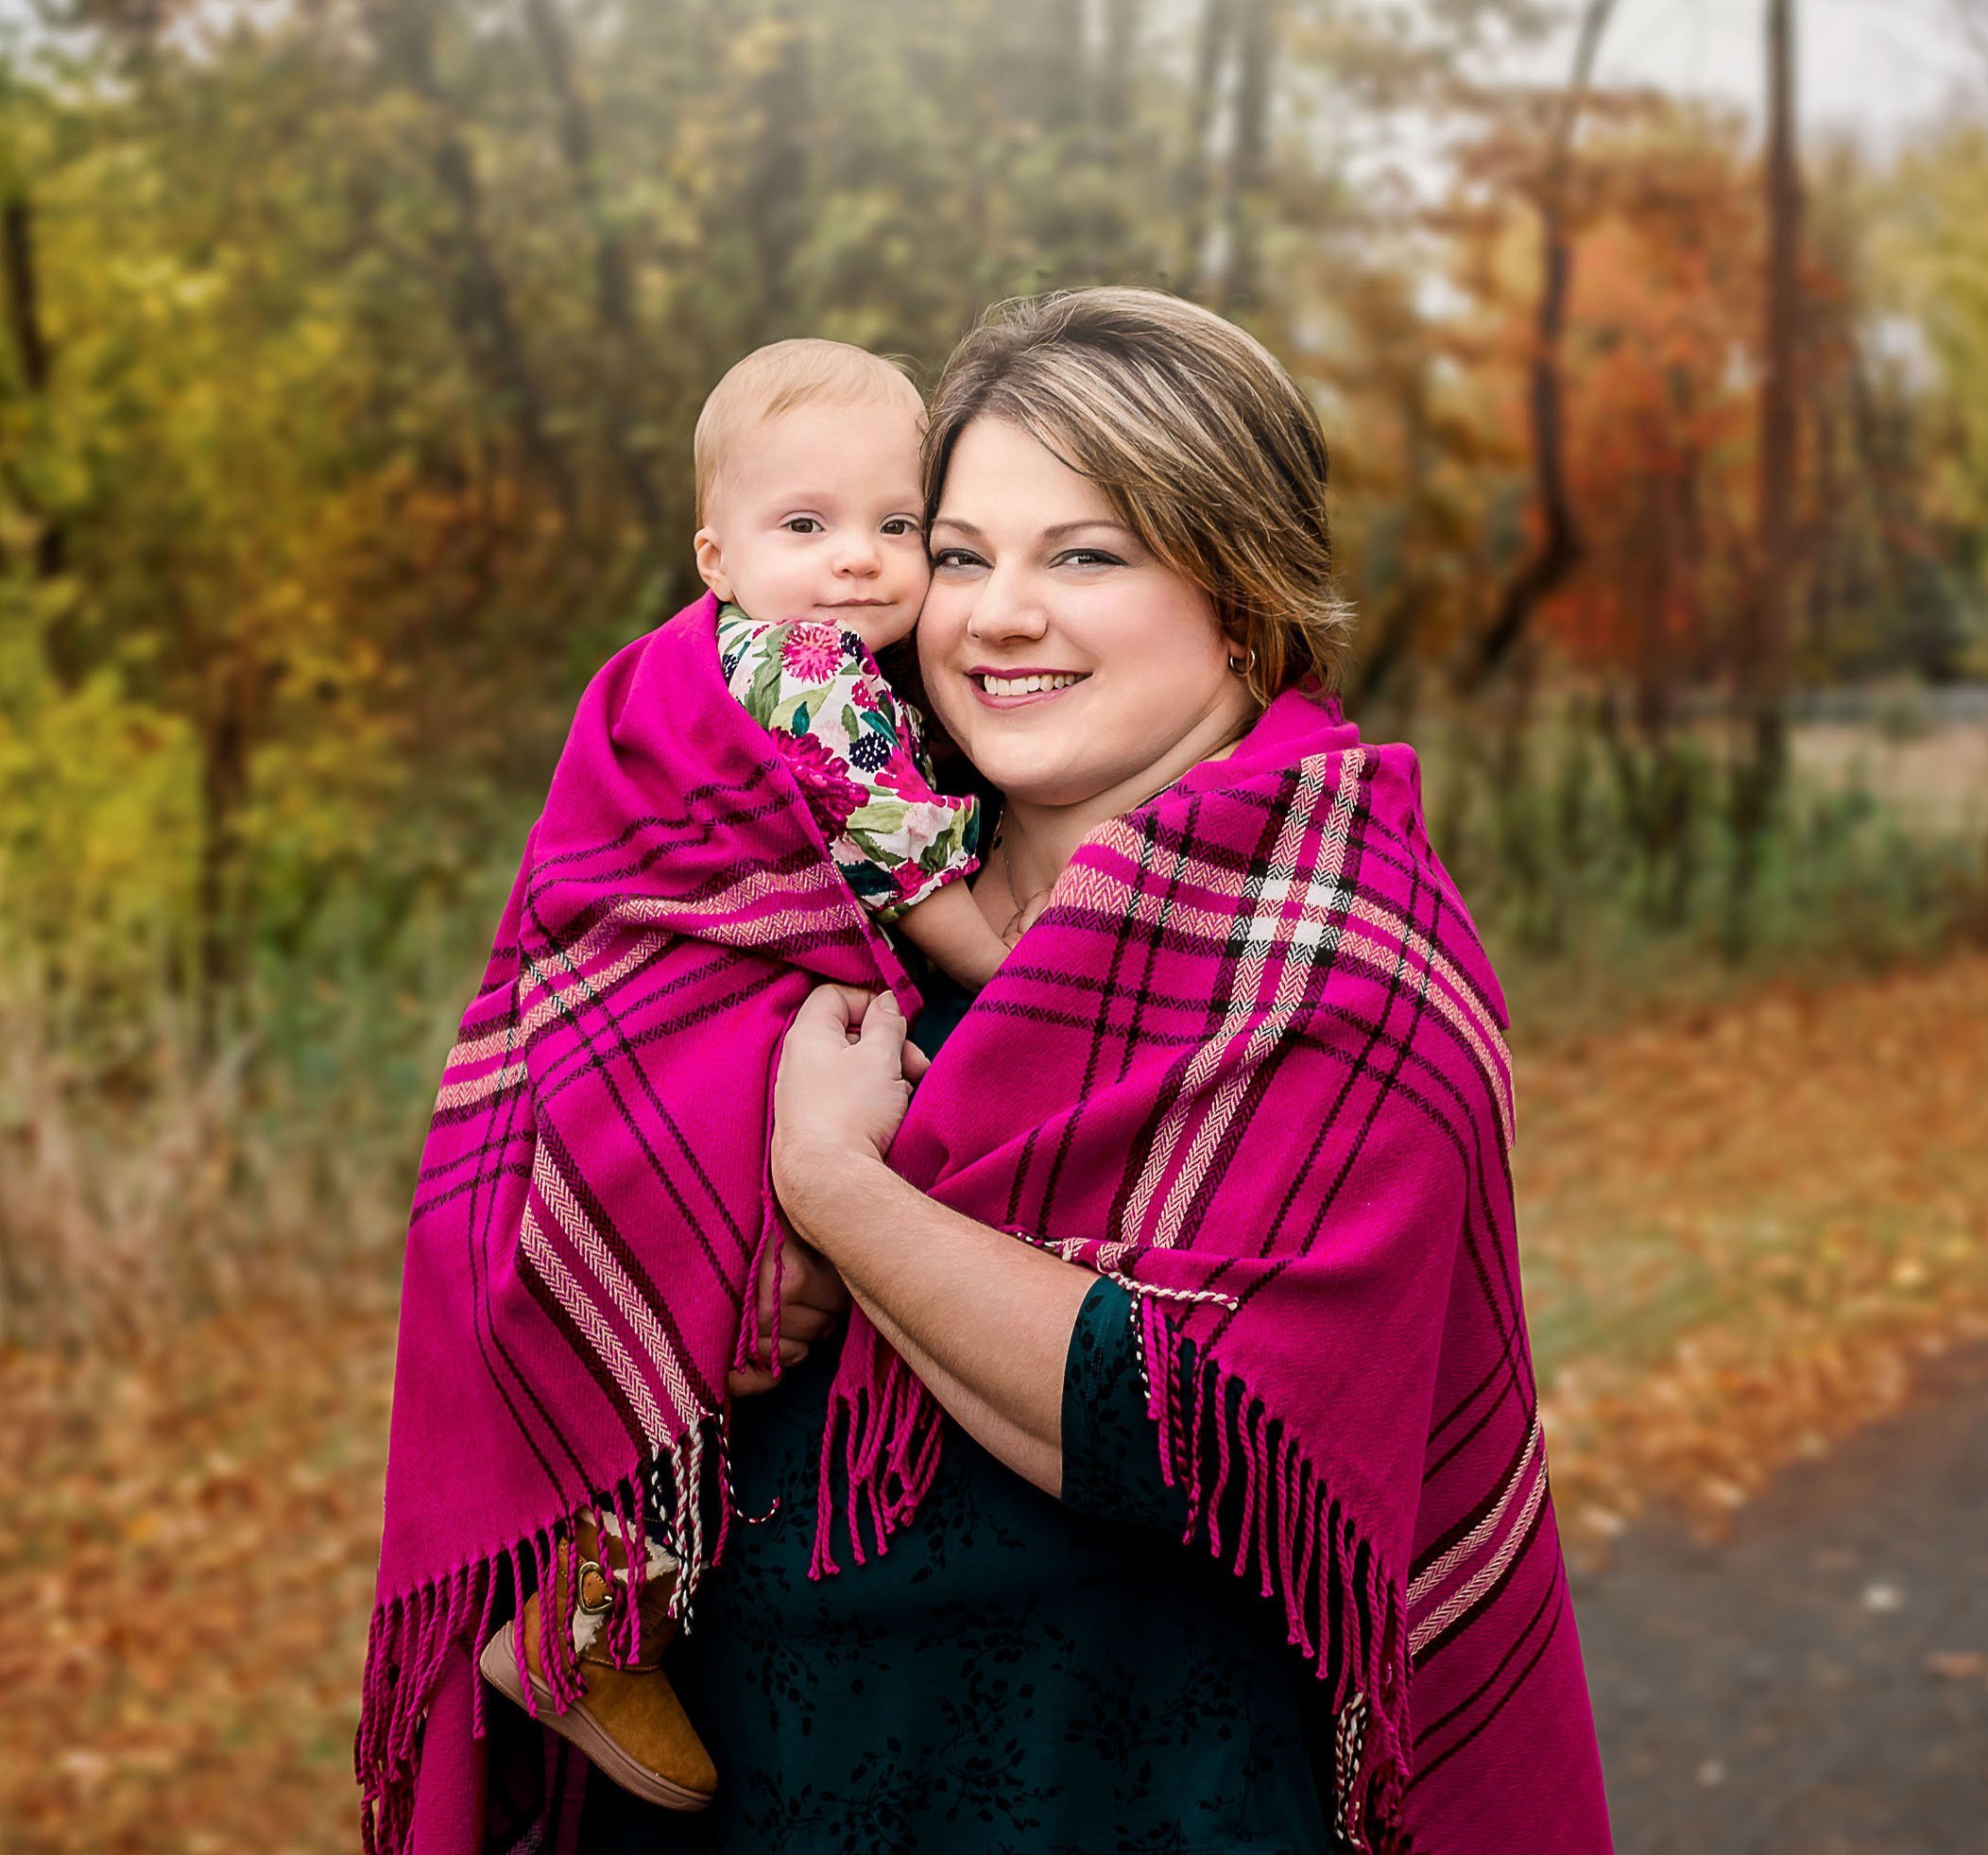 Mom snuggling her 1 year old daughter outside in fall under a bright pink blanket